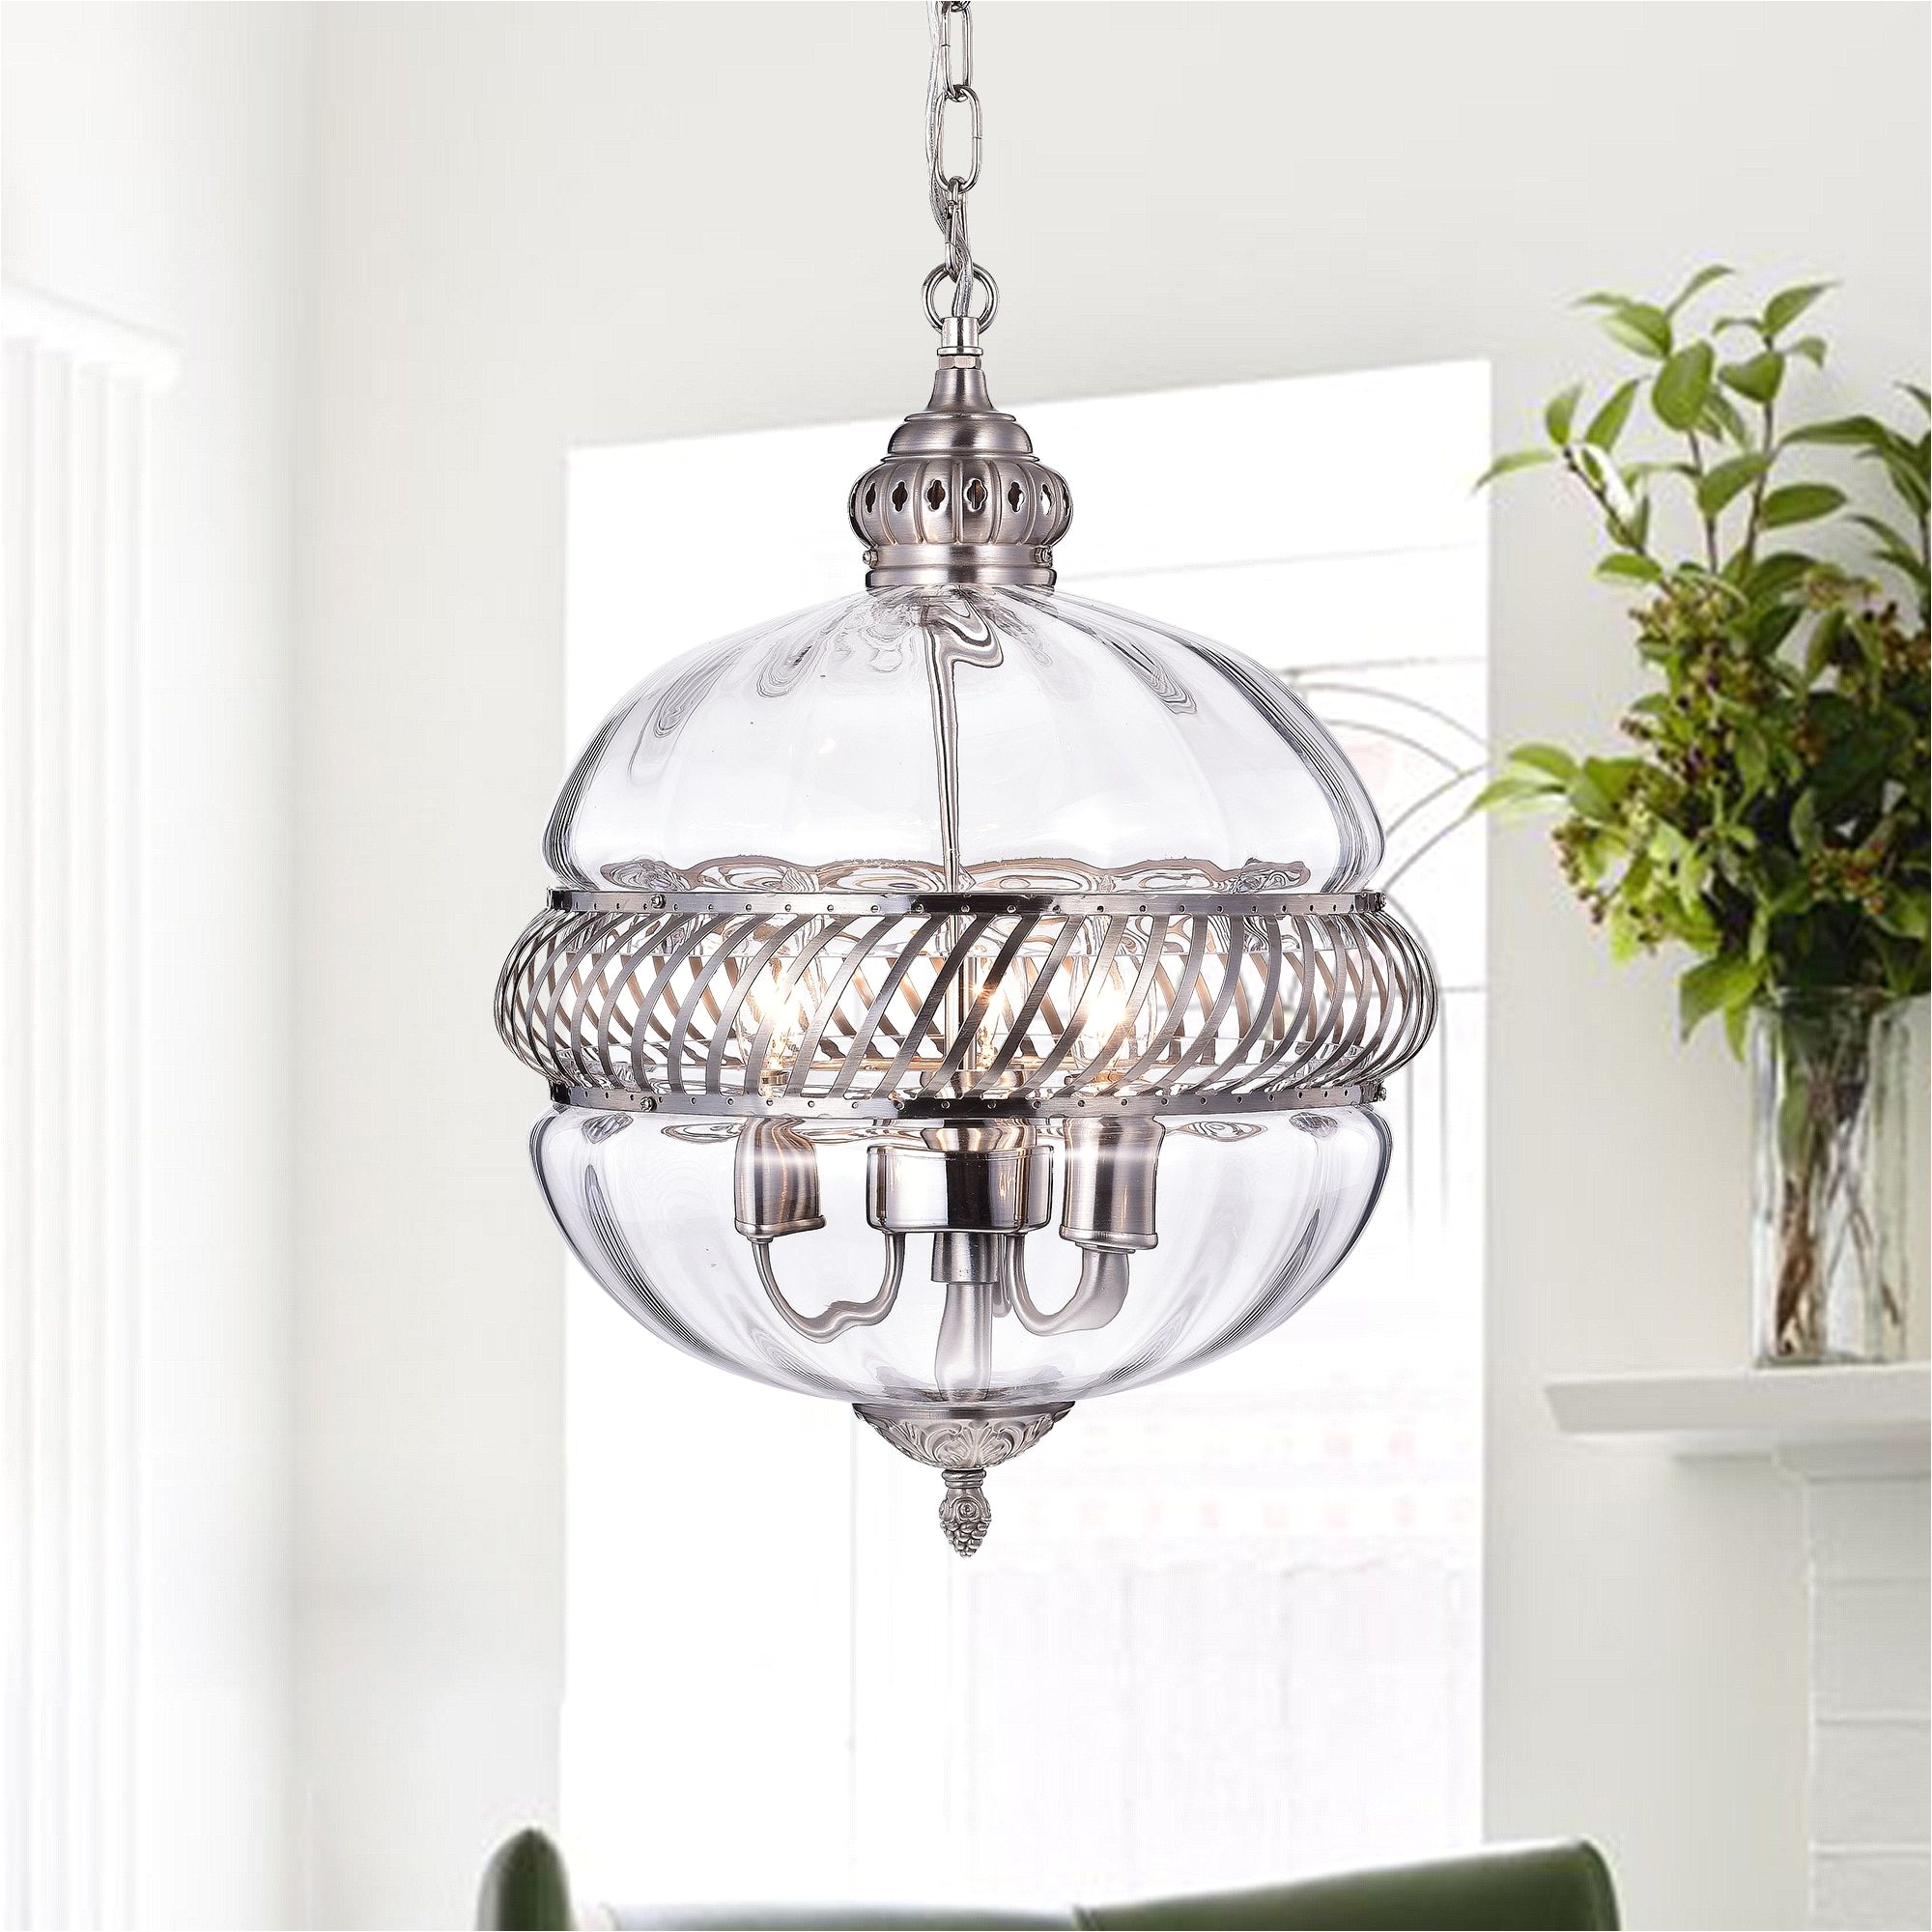 results for mercury glass lights free shipping on orders over 45 at overstock com